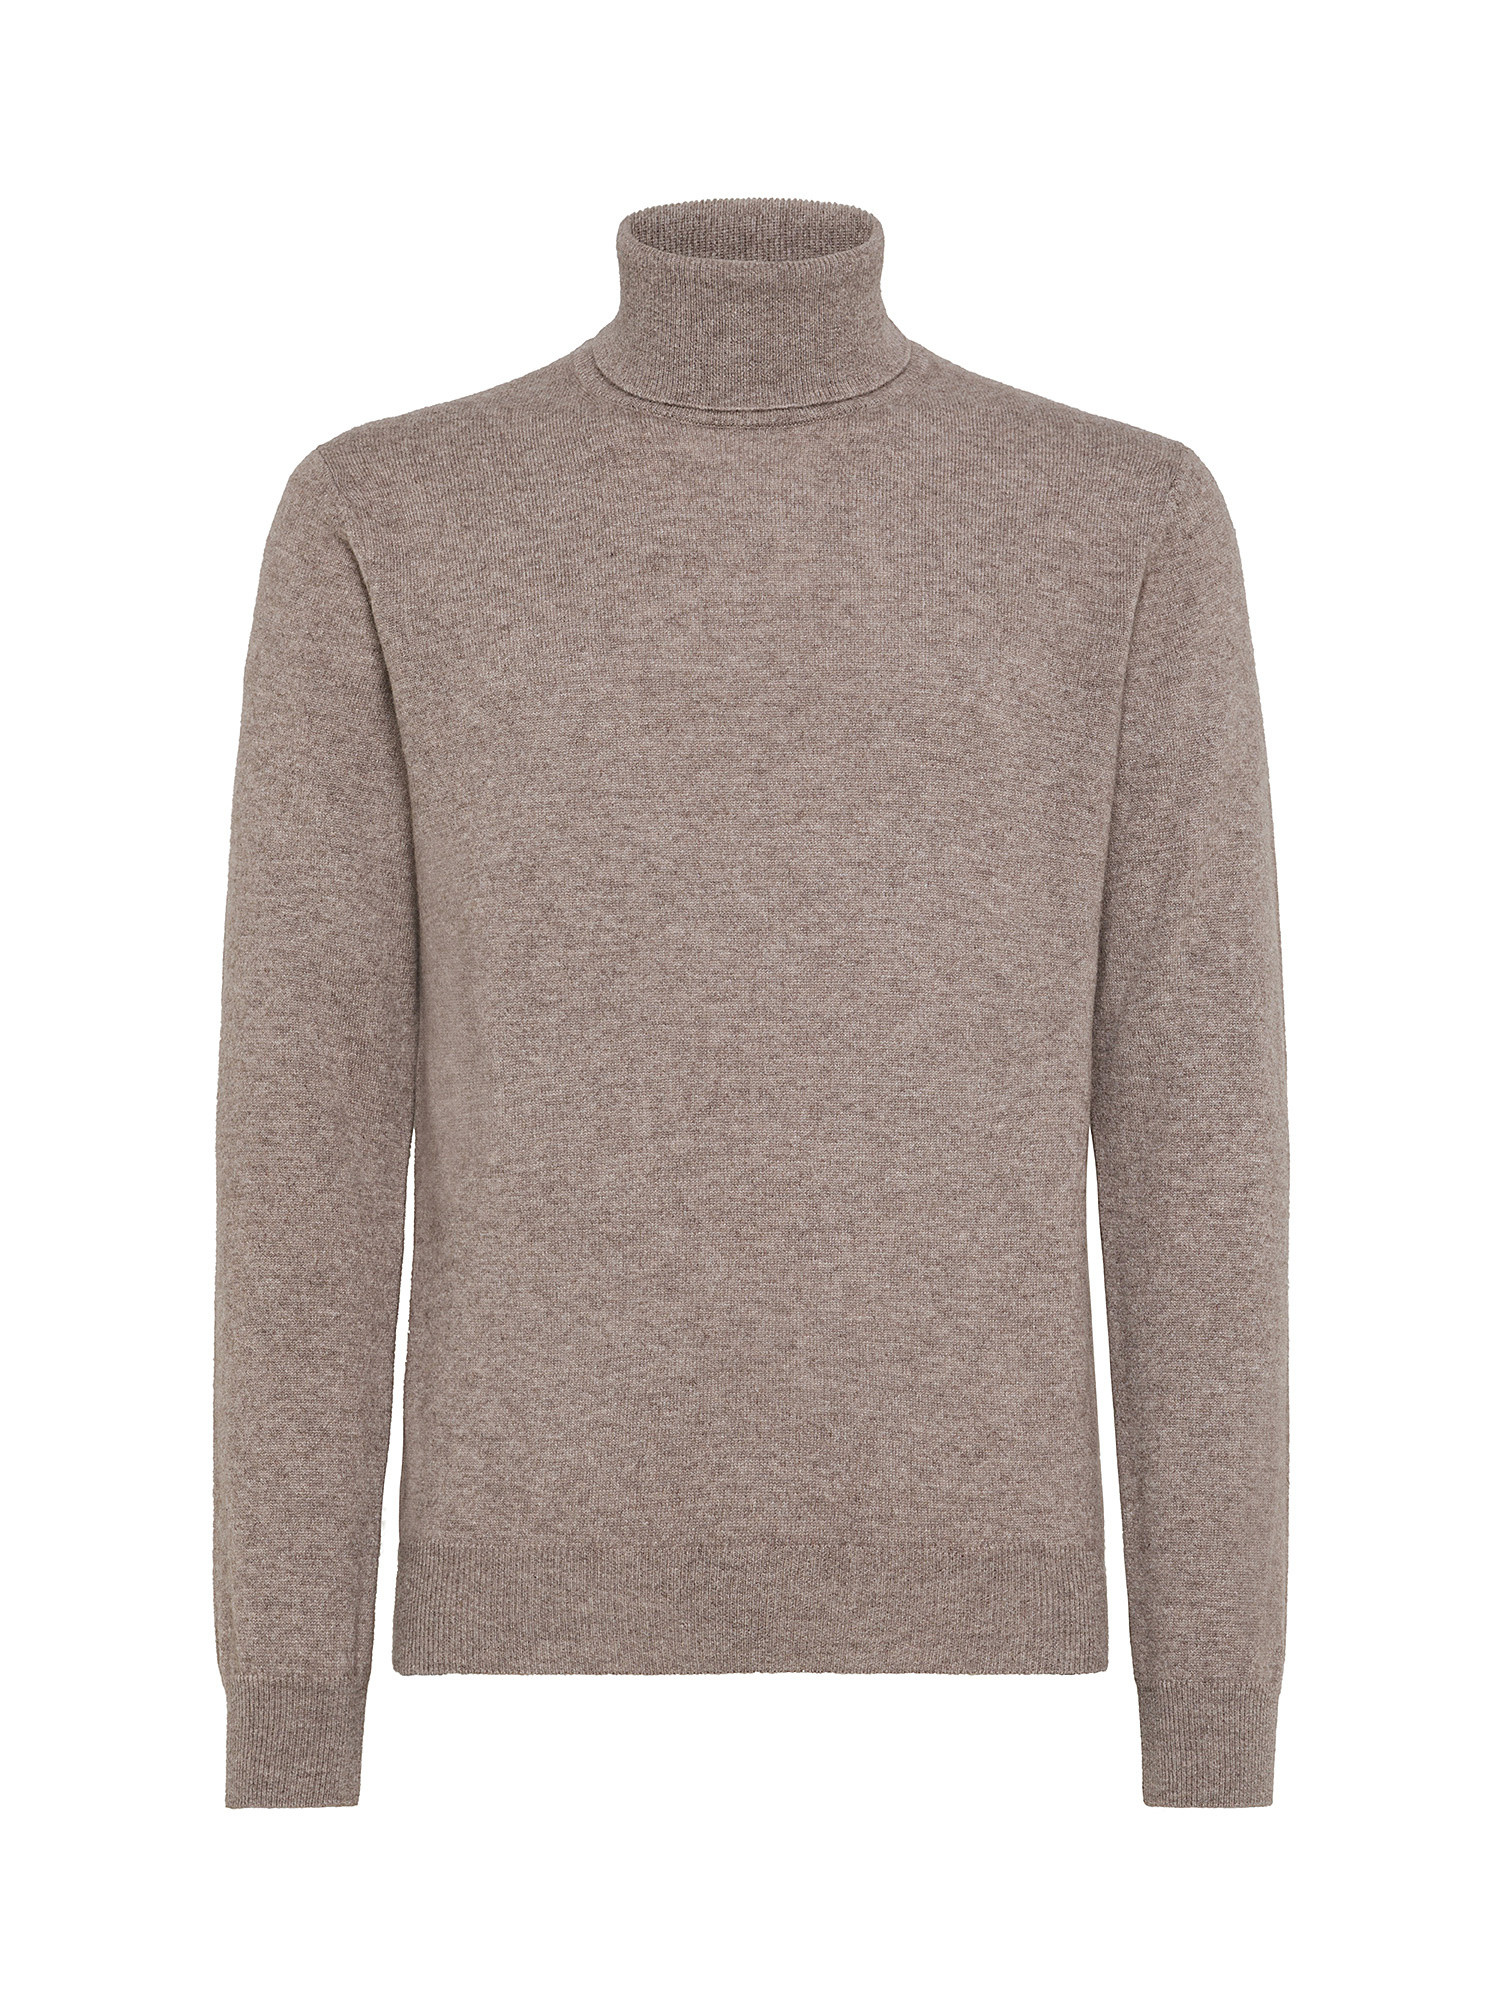 Coin Cashmere - Dolcevita in puro cashmere, Grigio taupe, large image number 0